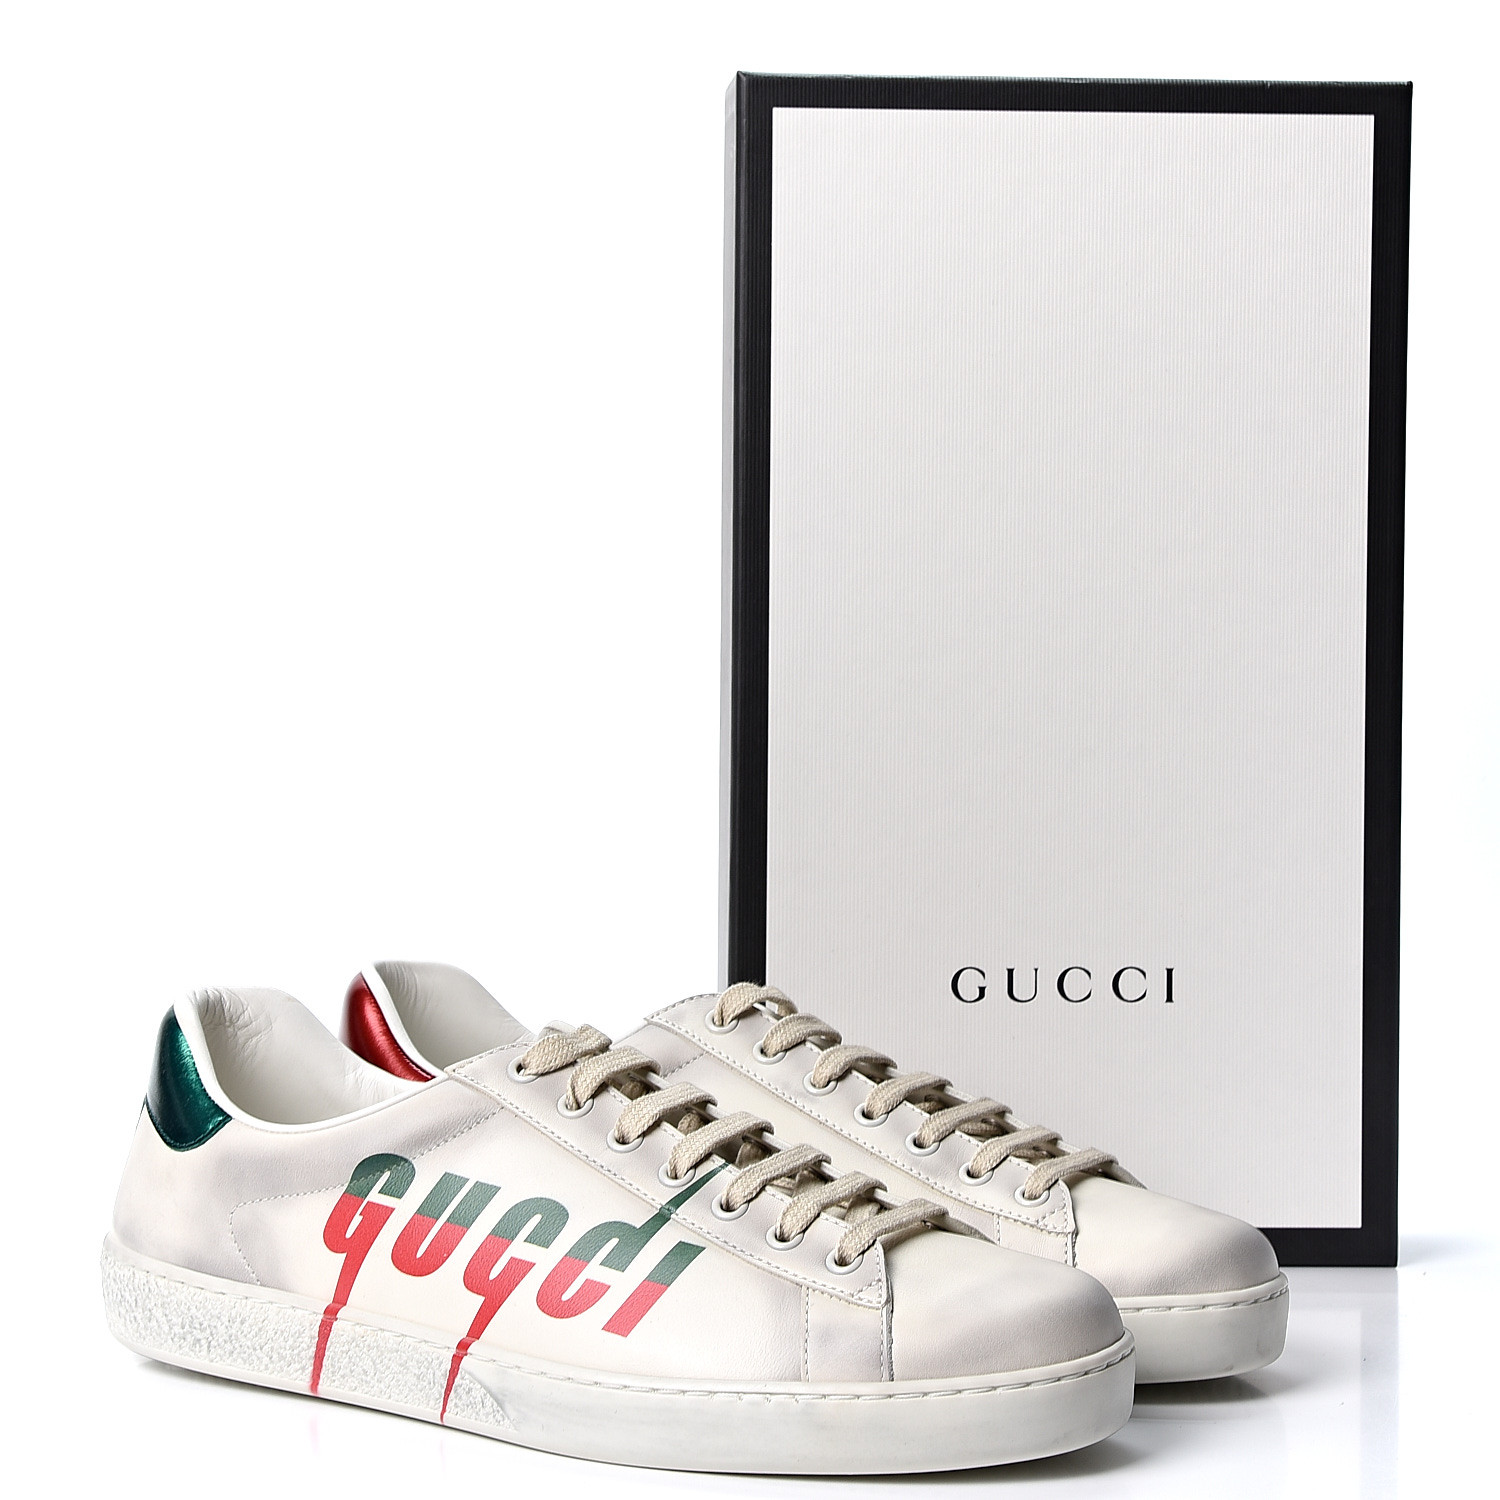 GUCCI Calfskin Blade Mens Distressed Ace Sneakers 10 White 567310